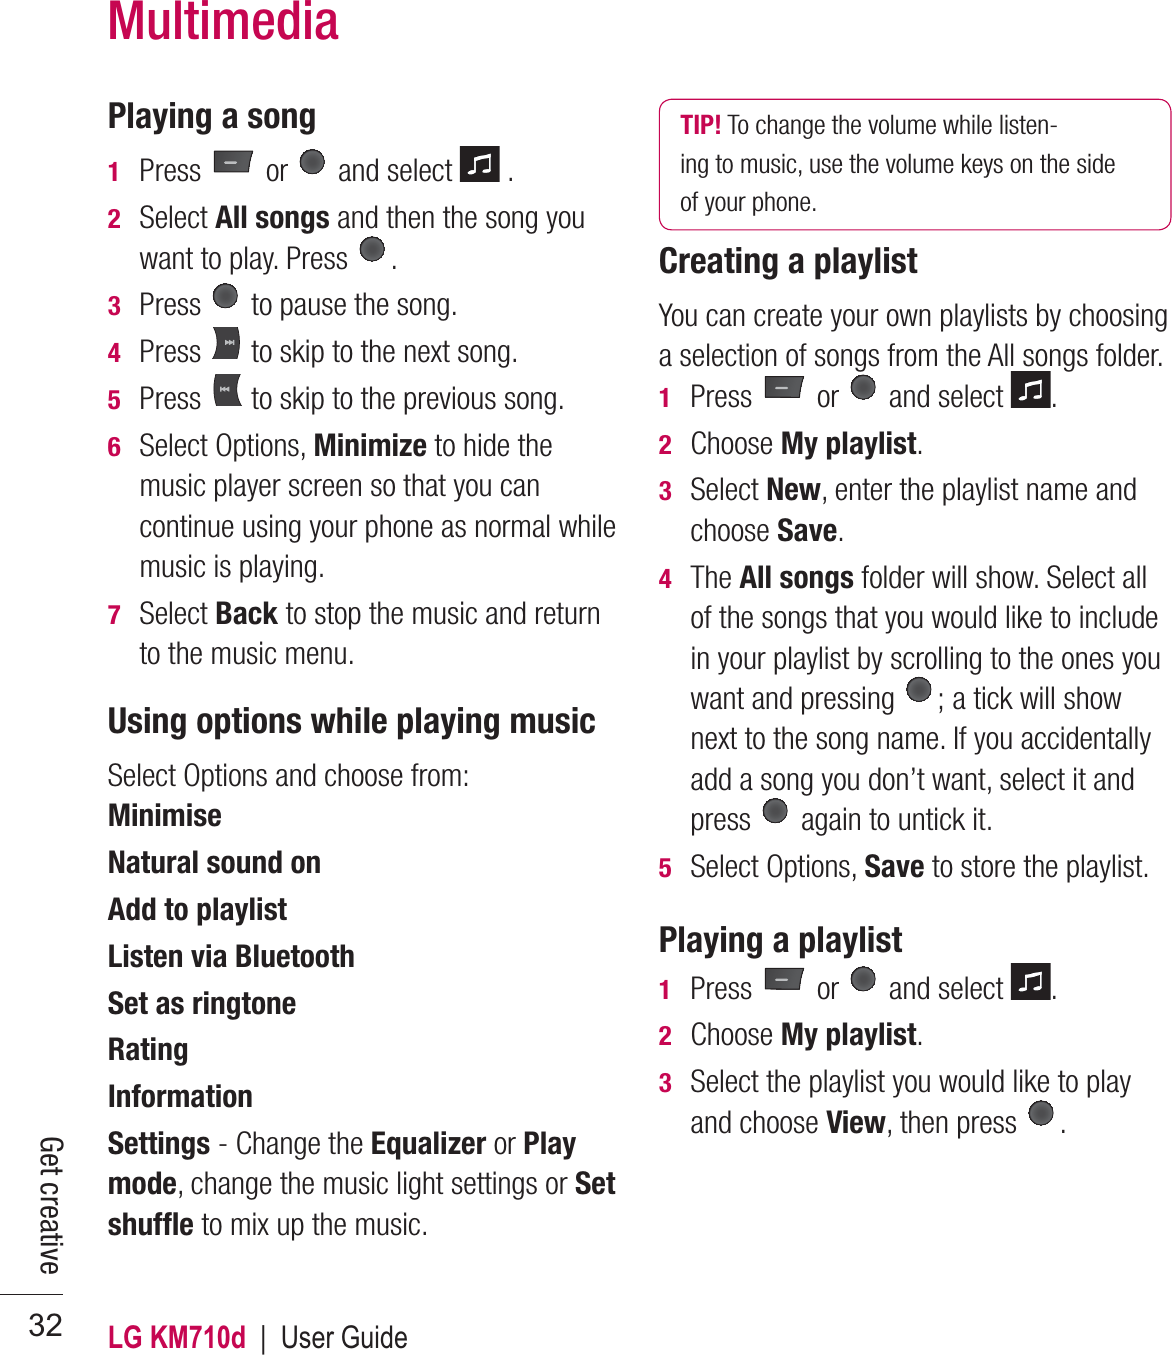 LG KM710d  |  User Guide32Playing a song1  Press   or   and select   .2  Select All songs and then the song you want to play. Press  .3  Press   to pause the song.4  Press   to skip to the next song.5  Press   to skip to the previous song.6  Select Options, Minimize to hide the music player screen so that you can continue using your phone as normal while music is playing.7  Select Back to stop the music and return to the music menu.Using options while playing musicSelect Options and choose from:Minimise Natural sound on Add to playlistListen via Bluetooth Set as ringtone Rating Information Settings - Change the Equalizer or Play mode, change the music light settings or Set shufﬂ e to mix up the music.TIP! To change the volume while listen-ing to music, use the volume keys on the side of your phone.Creating a playlistYou can create your own playlists by choosing a selection of songs from the All songs folder.1  Press   or   and select  .2 Choose My playlist.3  Select New, enter the playlist name and choose Save.4  The All songs folder will show. Select all of the songs that you would like to include in your playlist by scrolling to the ones you want and pressing  ; a tick will show next to the song name. If you accidentally add a song you don’t want, select it and press   again to untick it.5  Select Options, Save to store the playlist.Playing a playlist1  Press   or   and select  .2  Choose My playlist.3   Select the playlist you would like to play and choose View, then press  .MultimediaGet creative